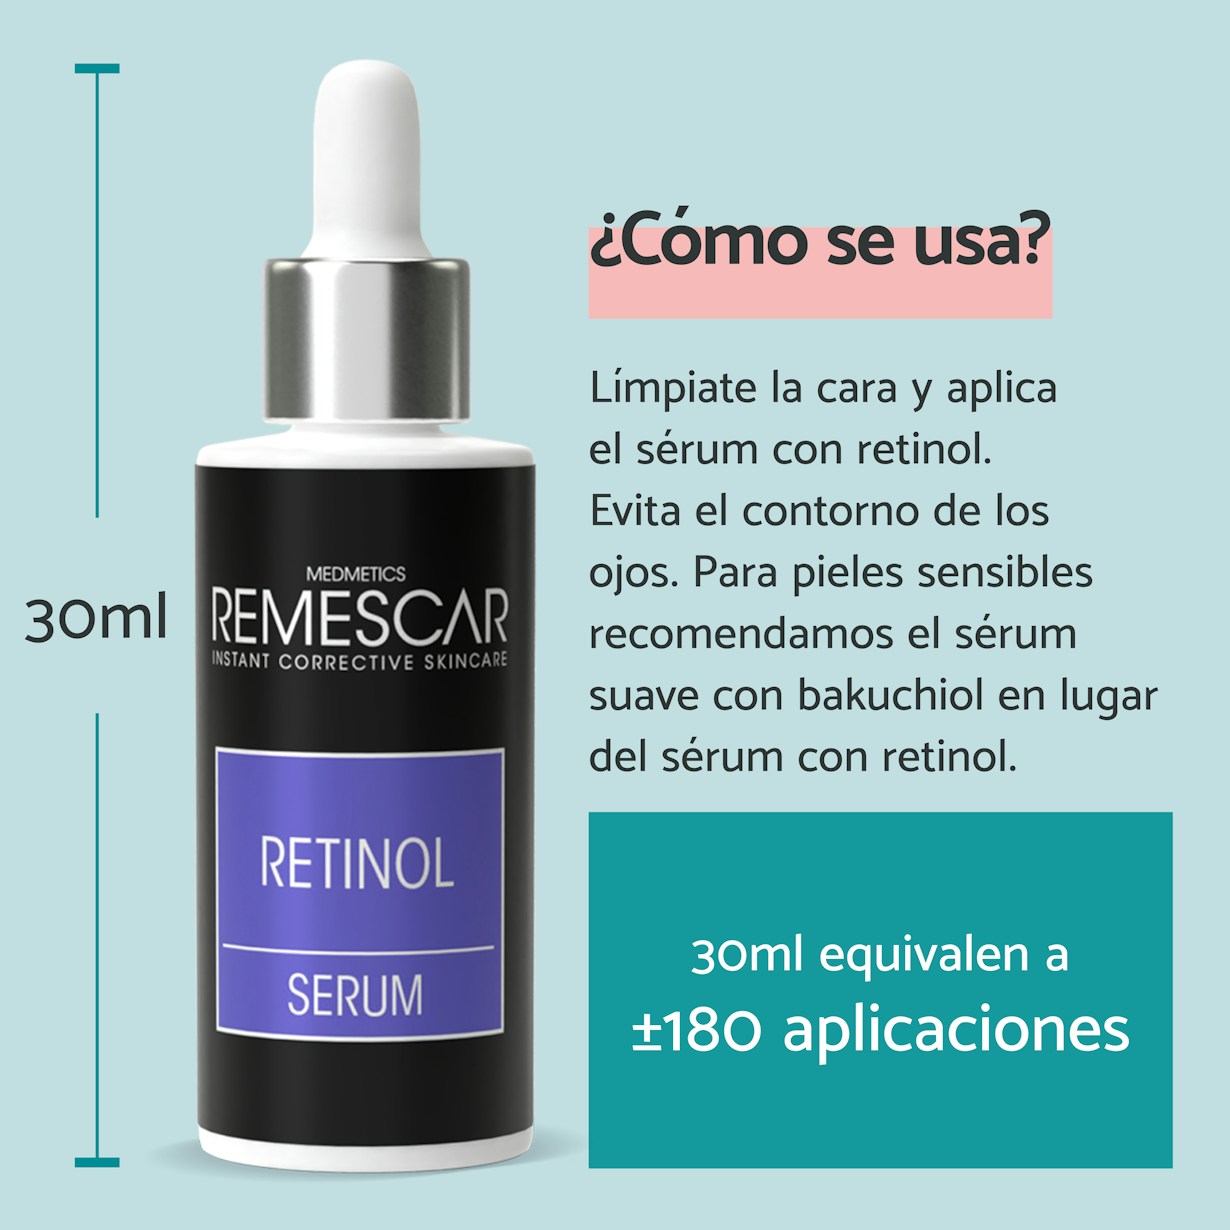 Remescar pdp pictures website and amazon 2000x2000px retinol serum ES4